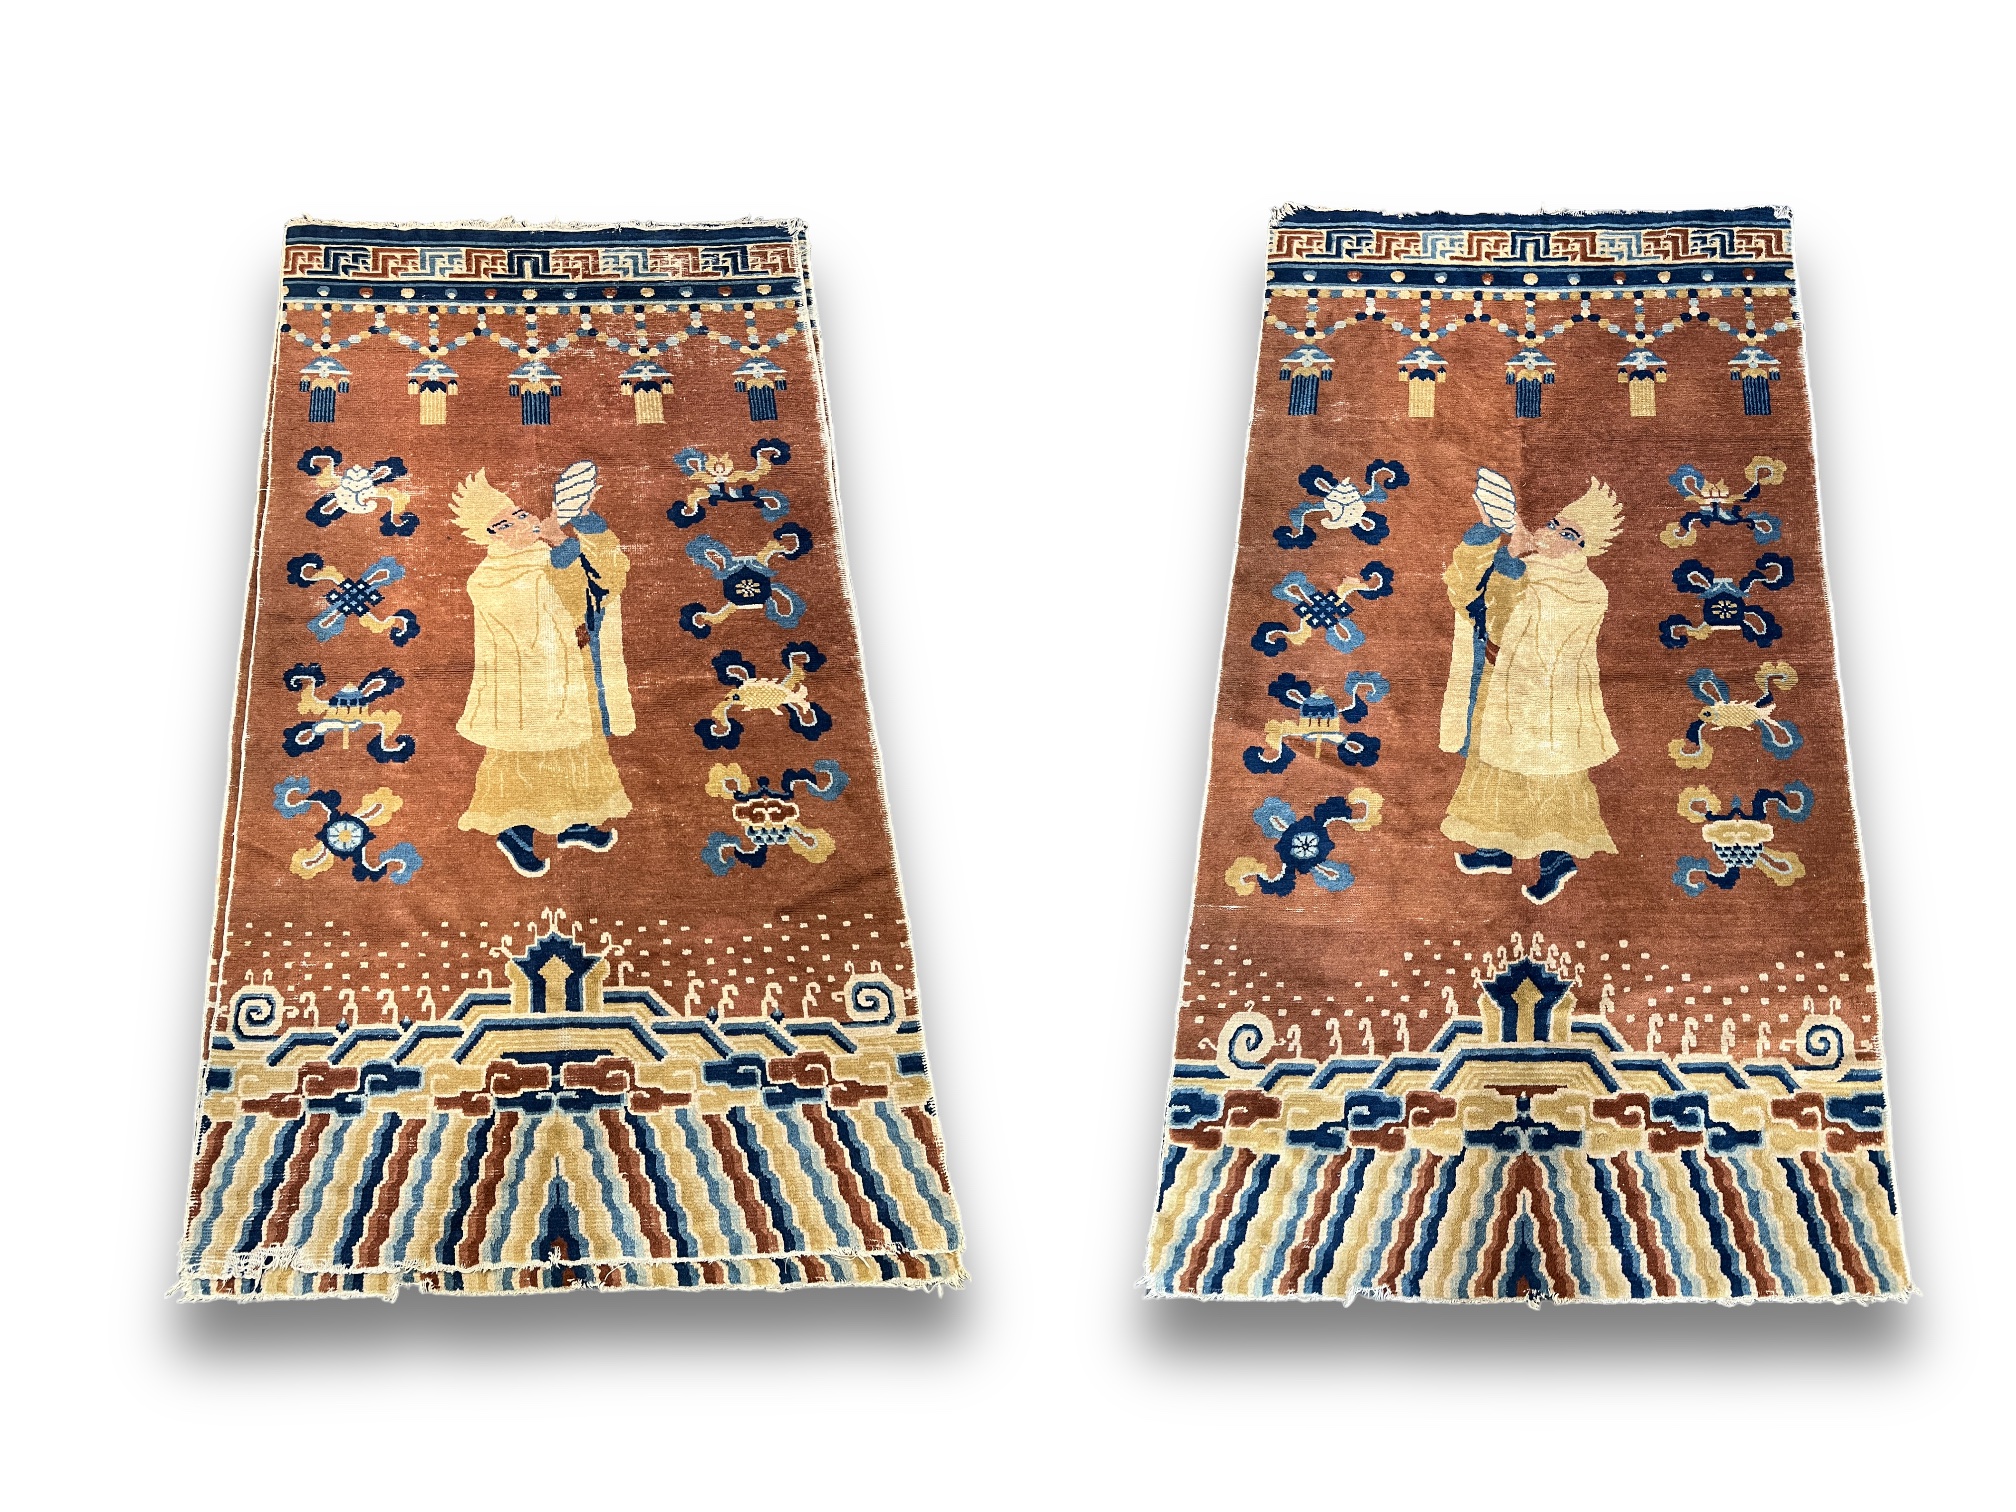 A Rare Pair of Buddhist Pillar Carpets, 18th/19th century, each with a yellow hat lama blowing a